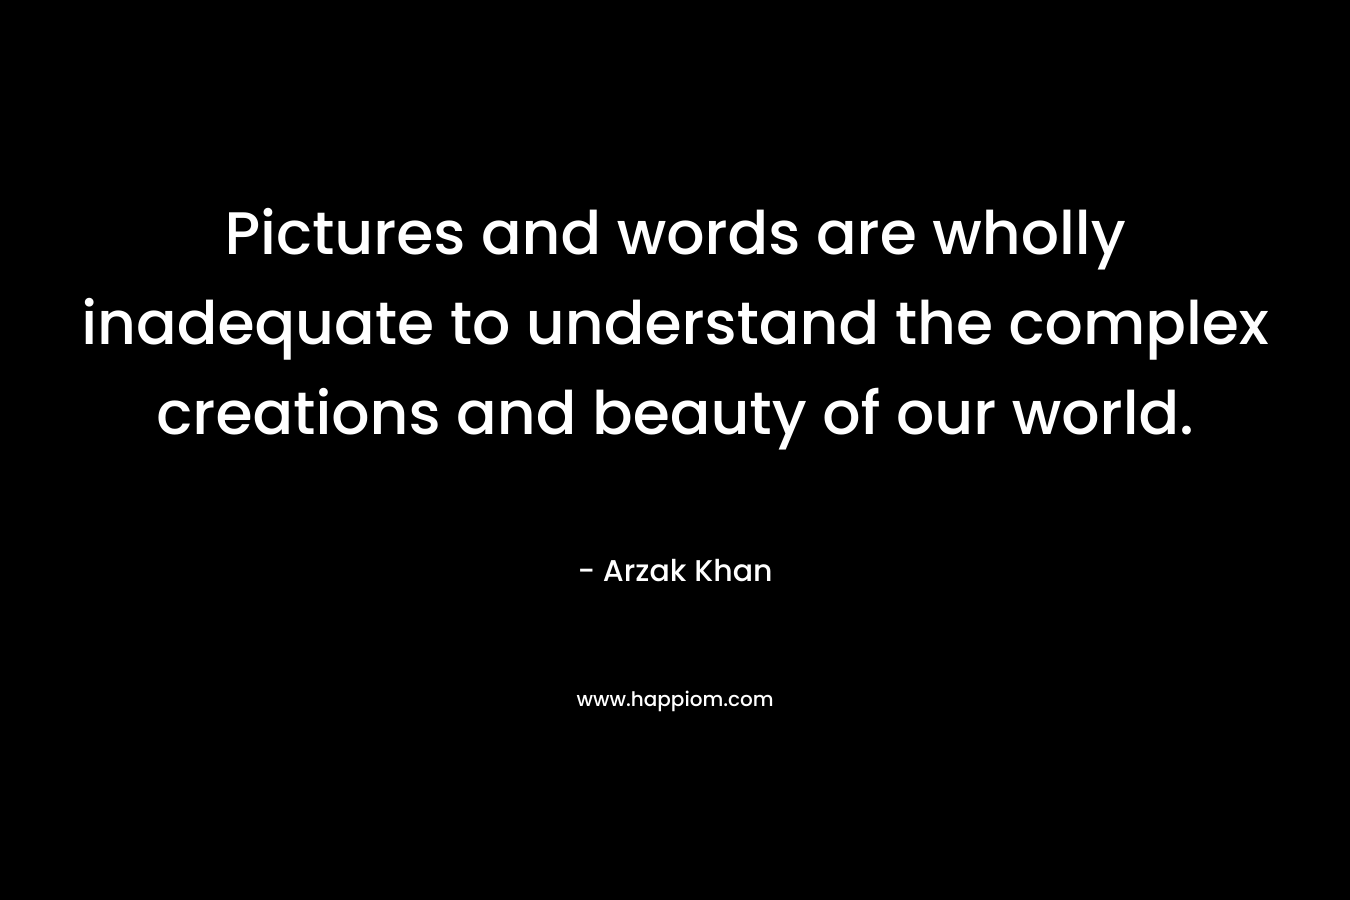 Pictures and words are wholly inadequate to understand the complex creations and beauty of our world. – Arzak Khan